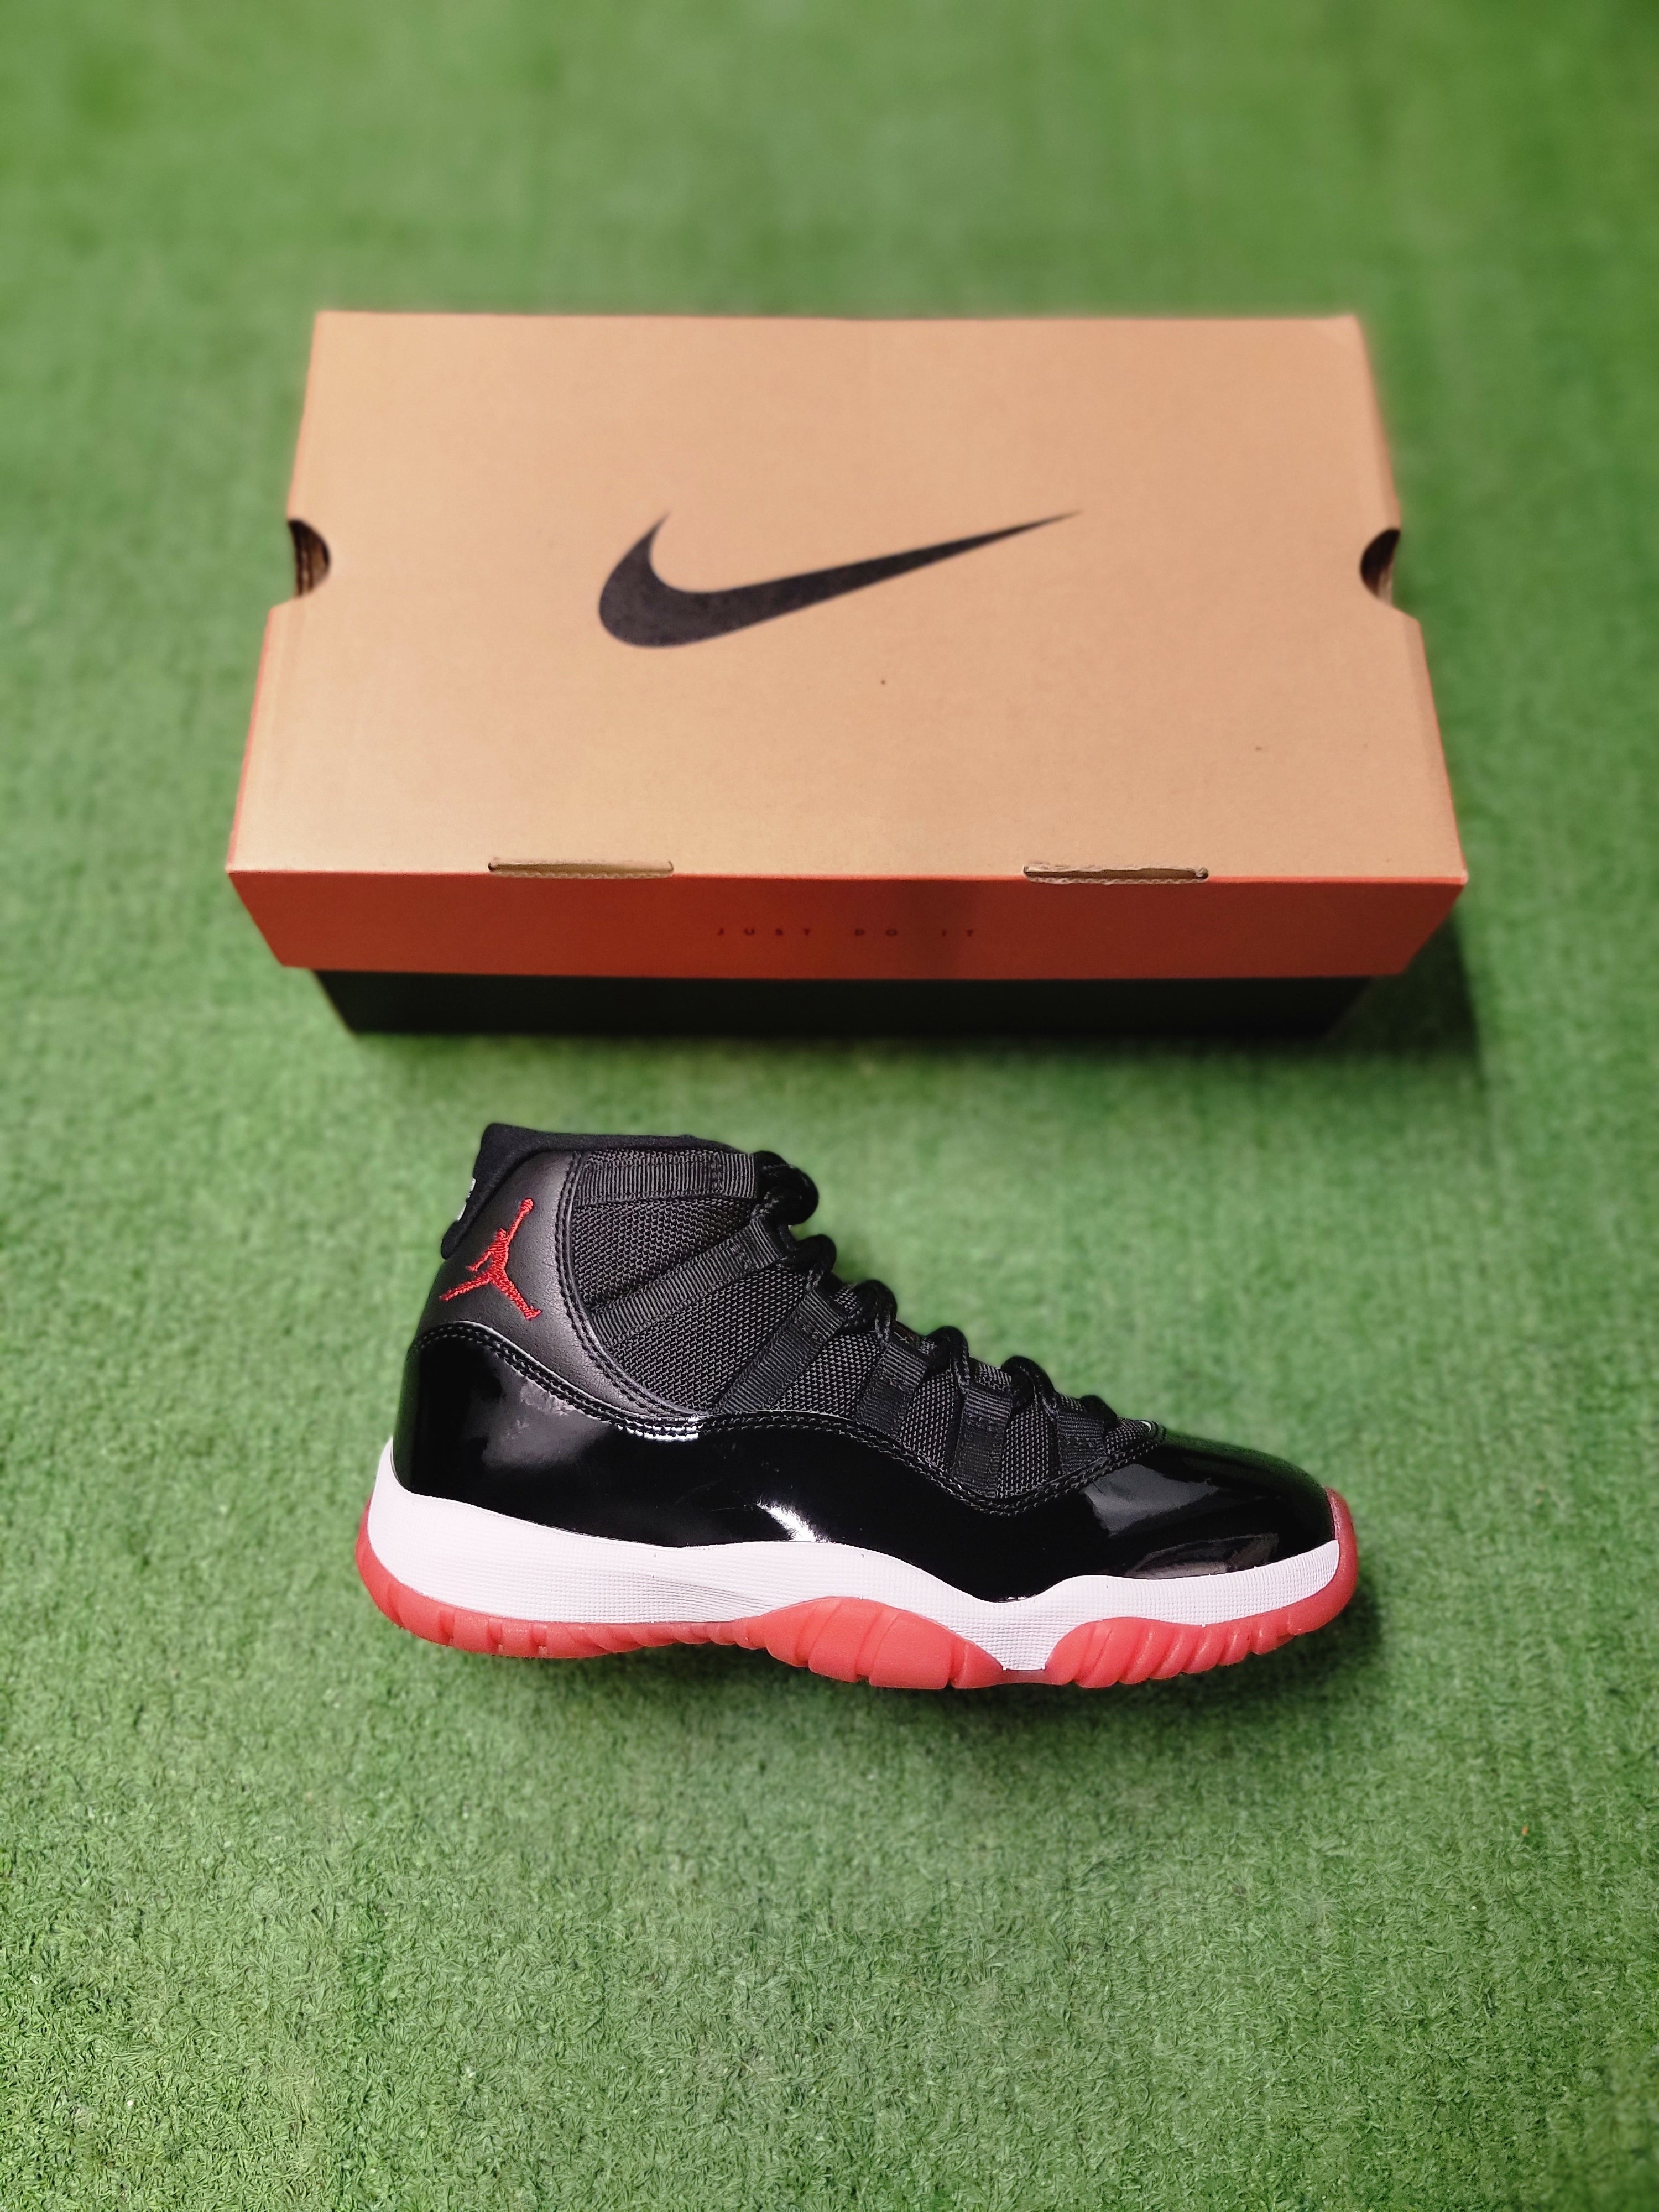 Air Jordan 11 Retro Bred Playoffs 2019 Men Shoes New With Box